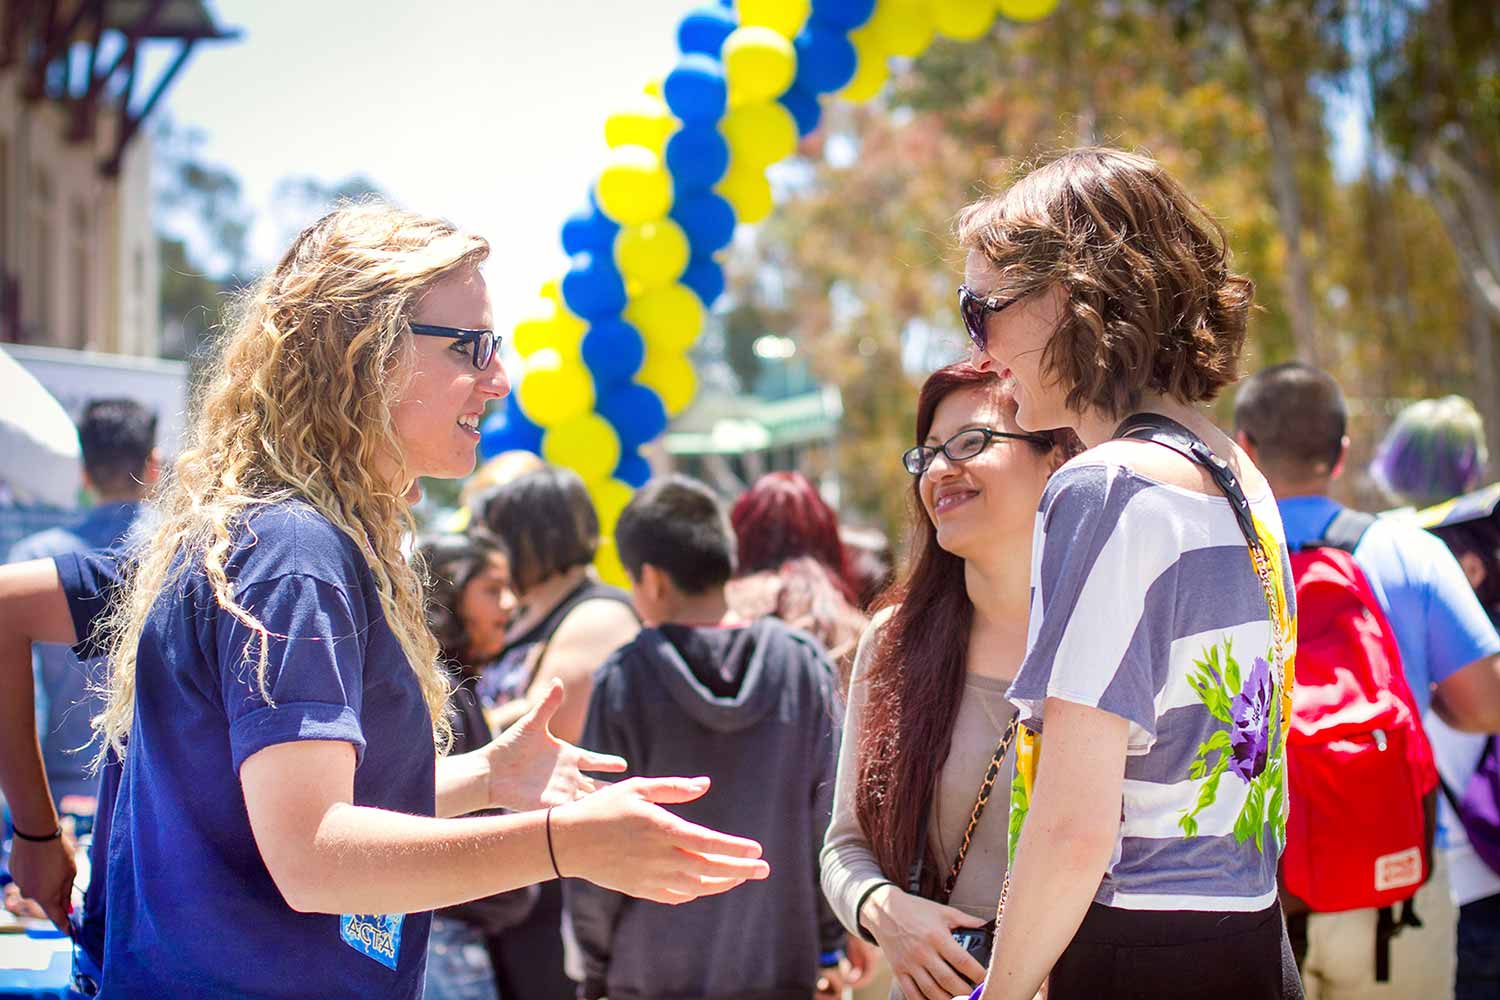 UCSD, What About Transfer Students? | The Triton